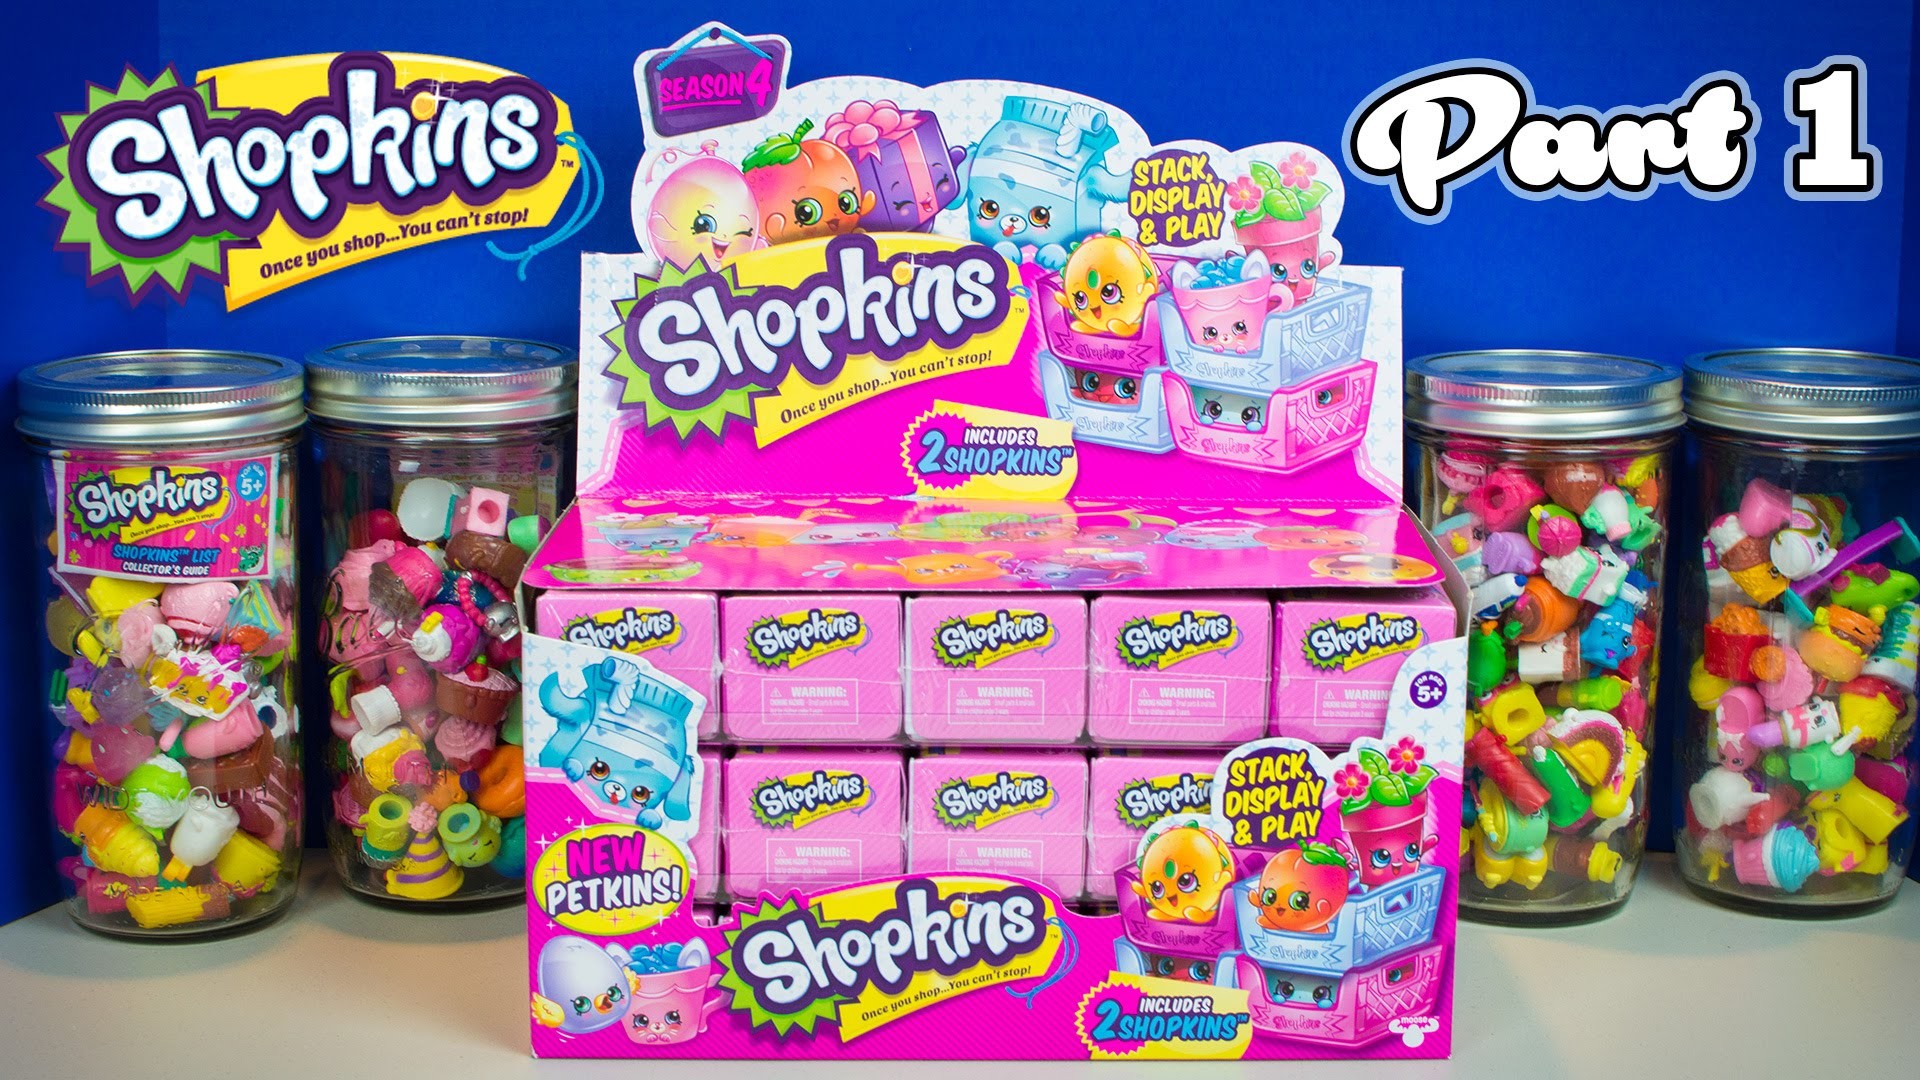 1920x1080 SHOPKINS SEASON 4 PETKINS Blind Baskets Part 1 | Hunt for a Limited Edition  Shopkin! - YouTube